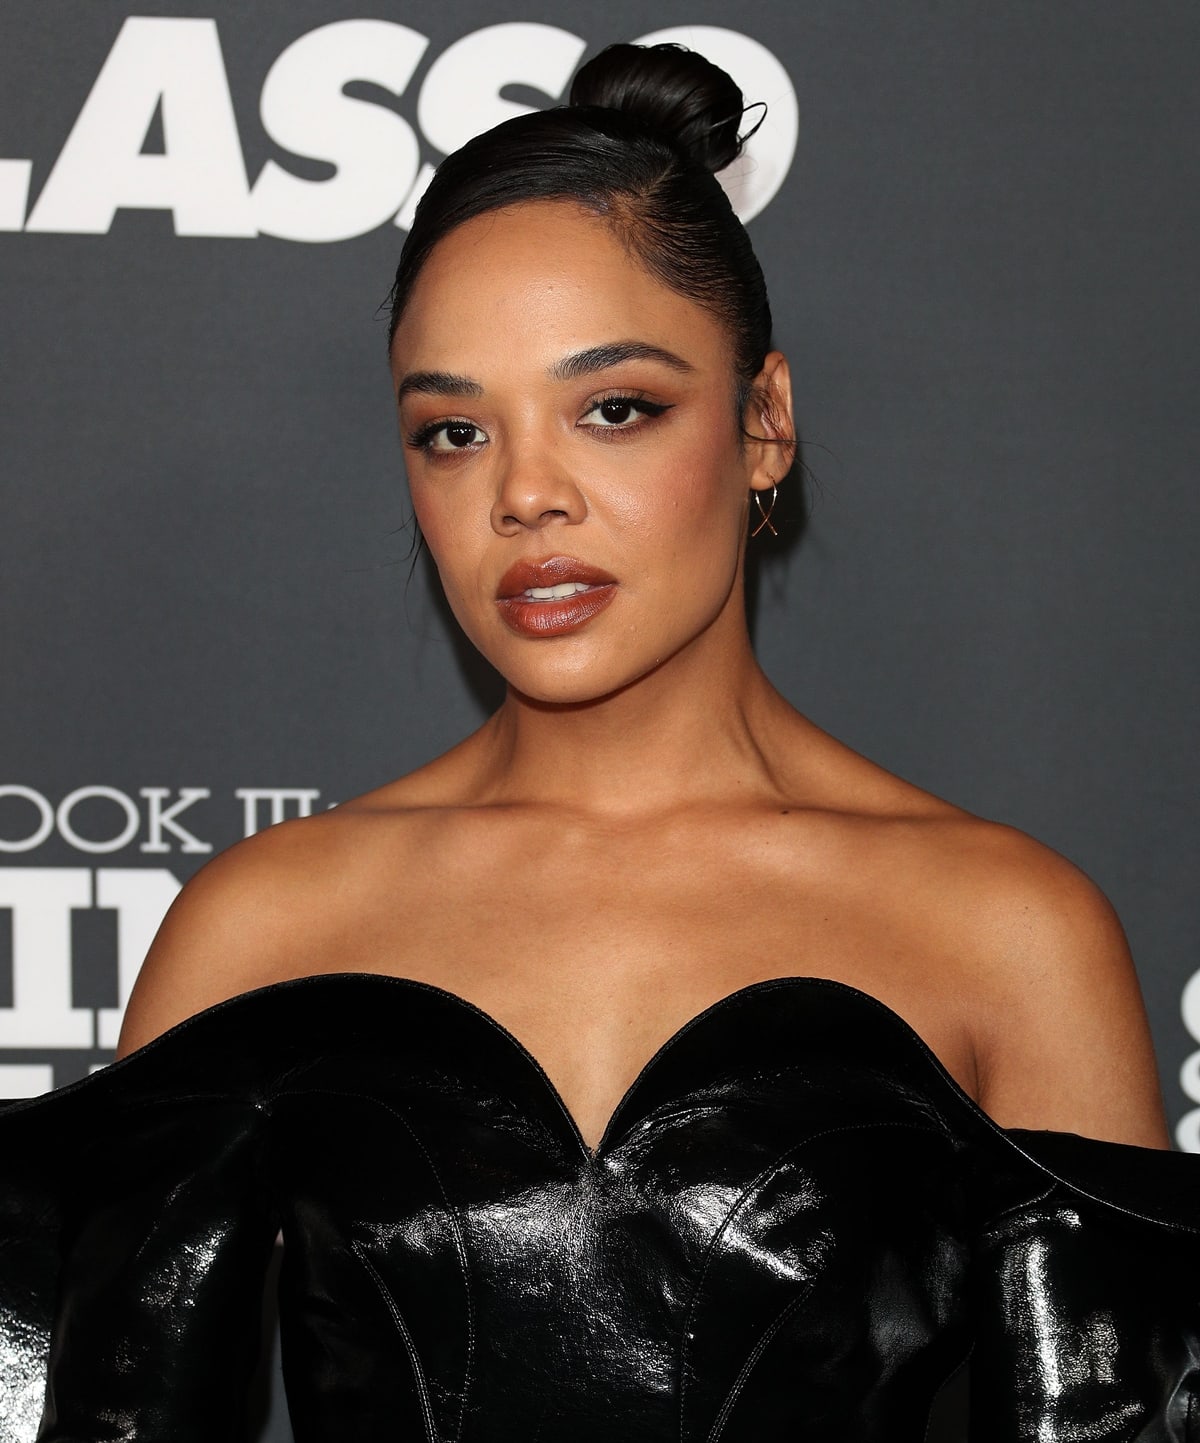 Tessa Thompson wears a sculptural black Daniel Del Cor strapless dress at the 4th annual Celebration of Black Cinema and Television presented by The Critics Choice Association